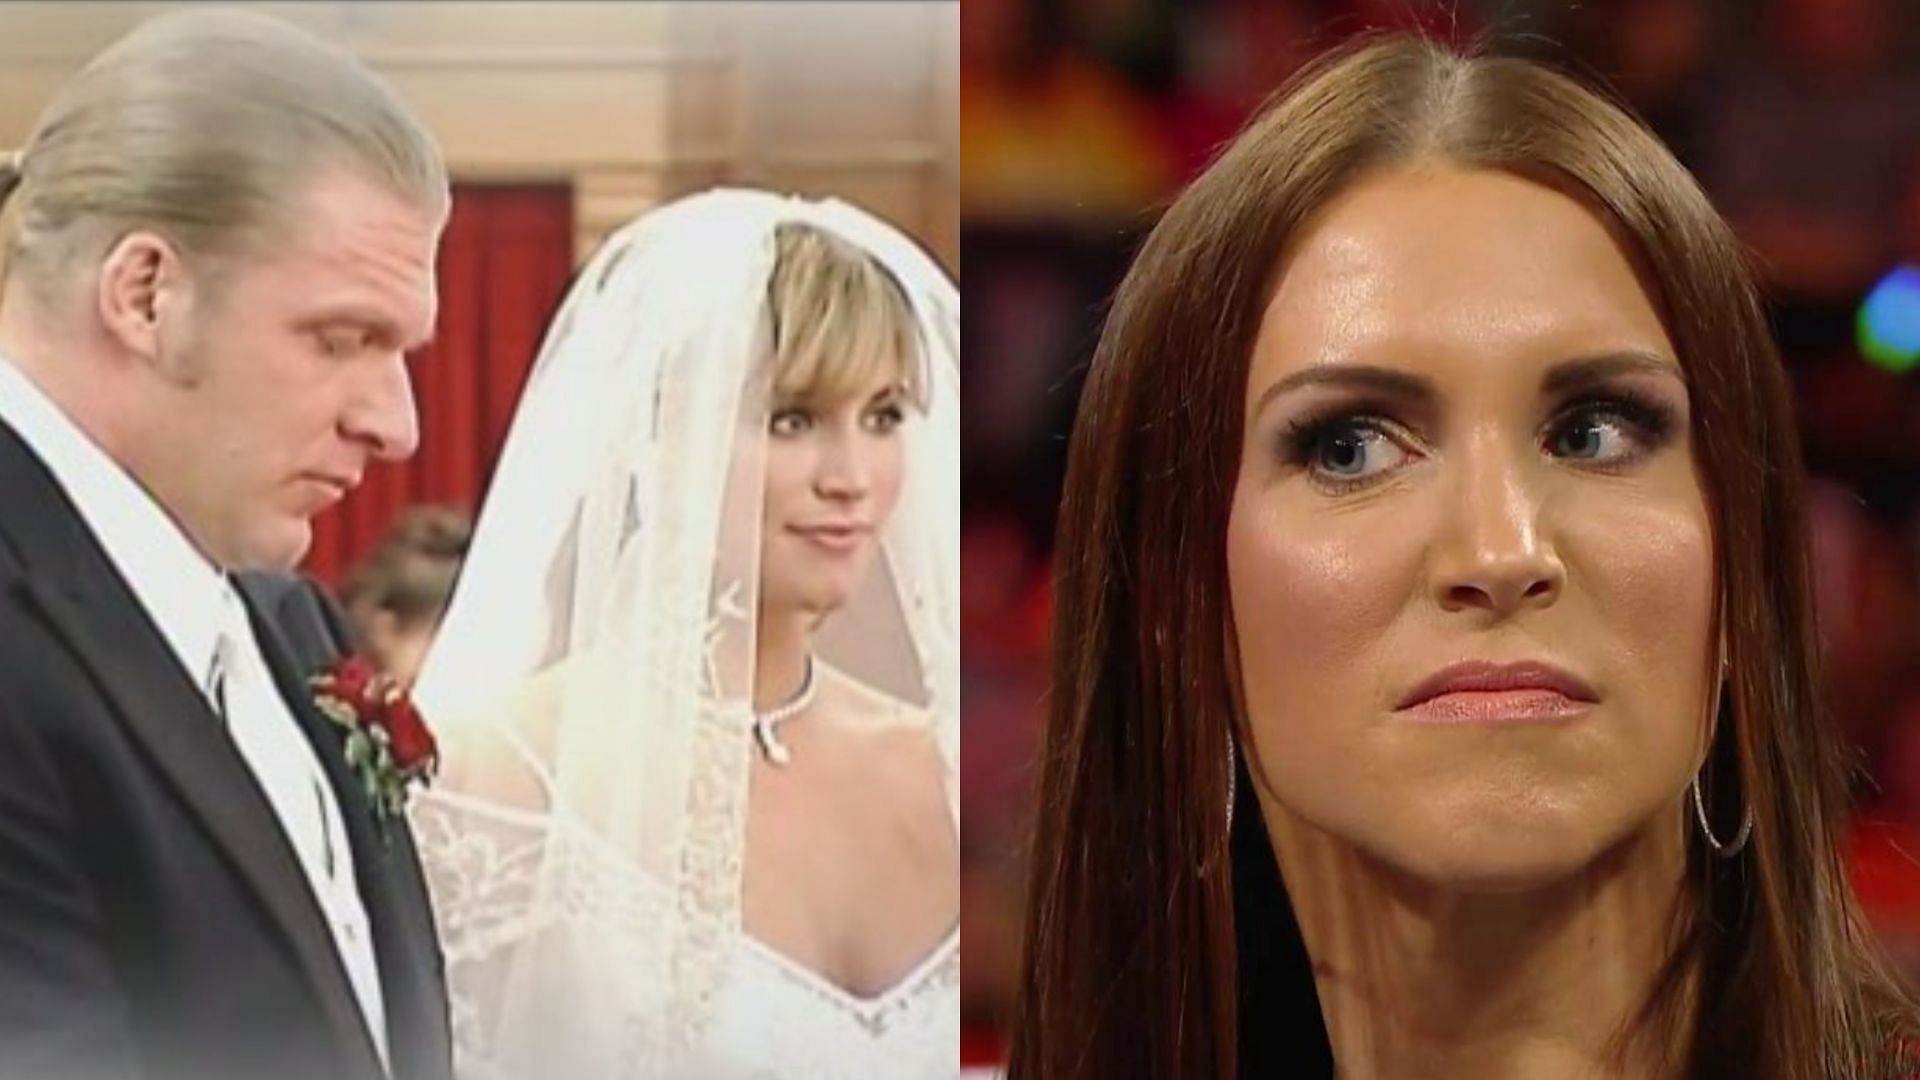 Triple H and Stephanie McMahon married in October 2003